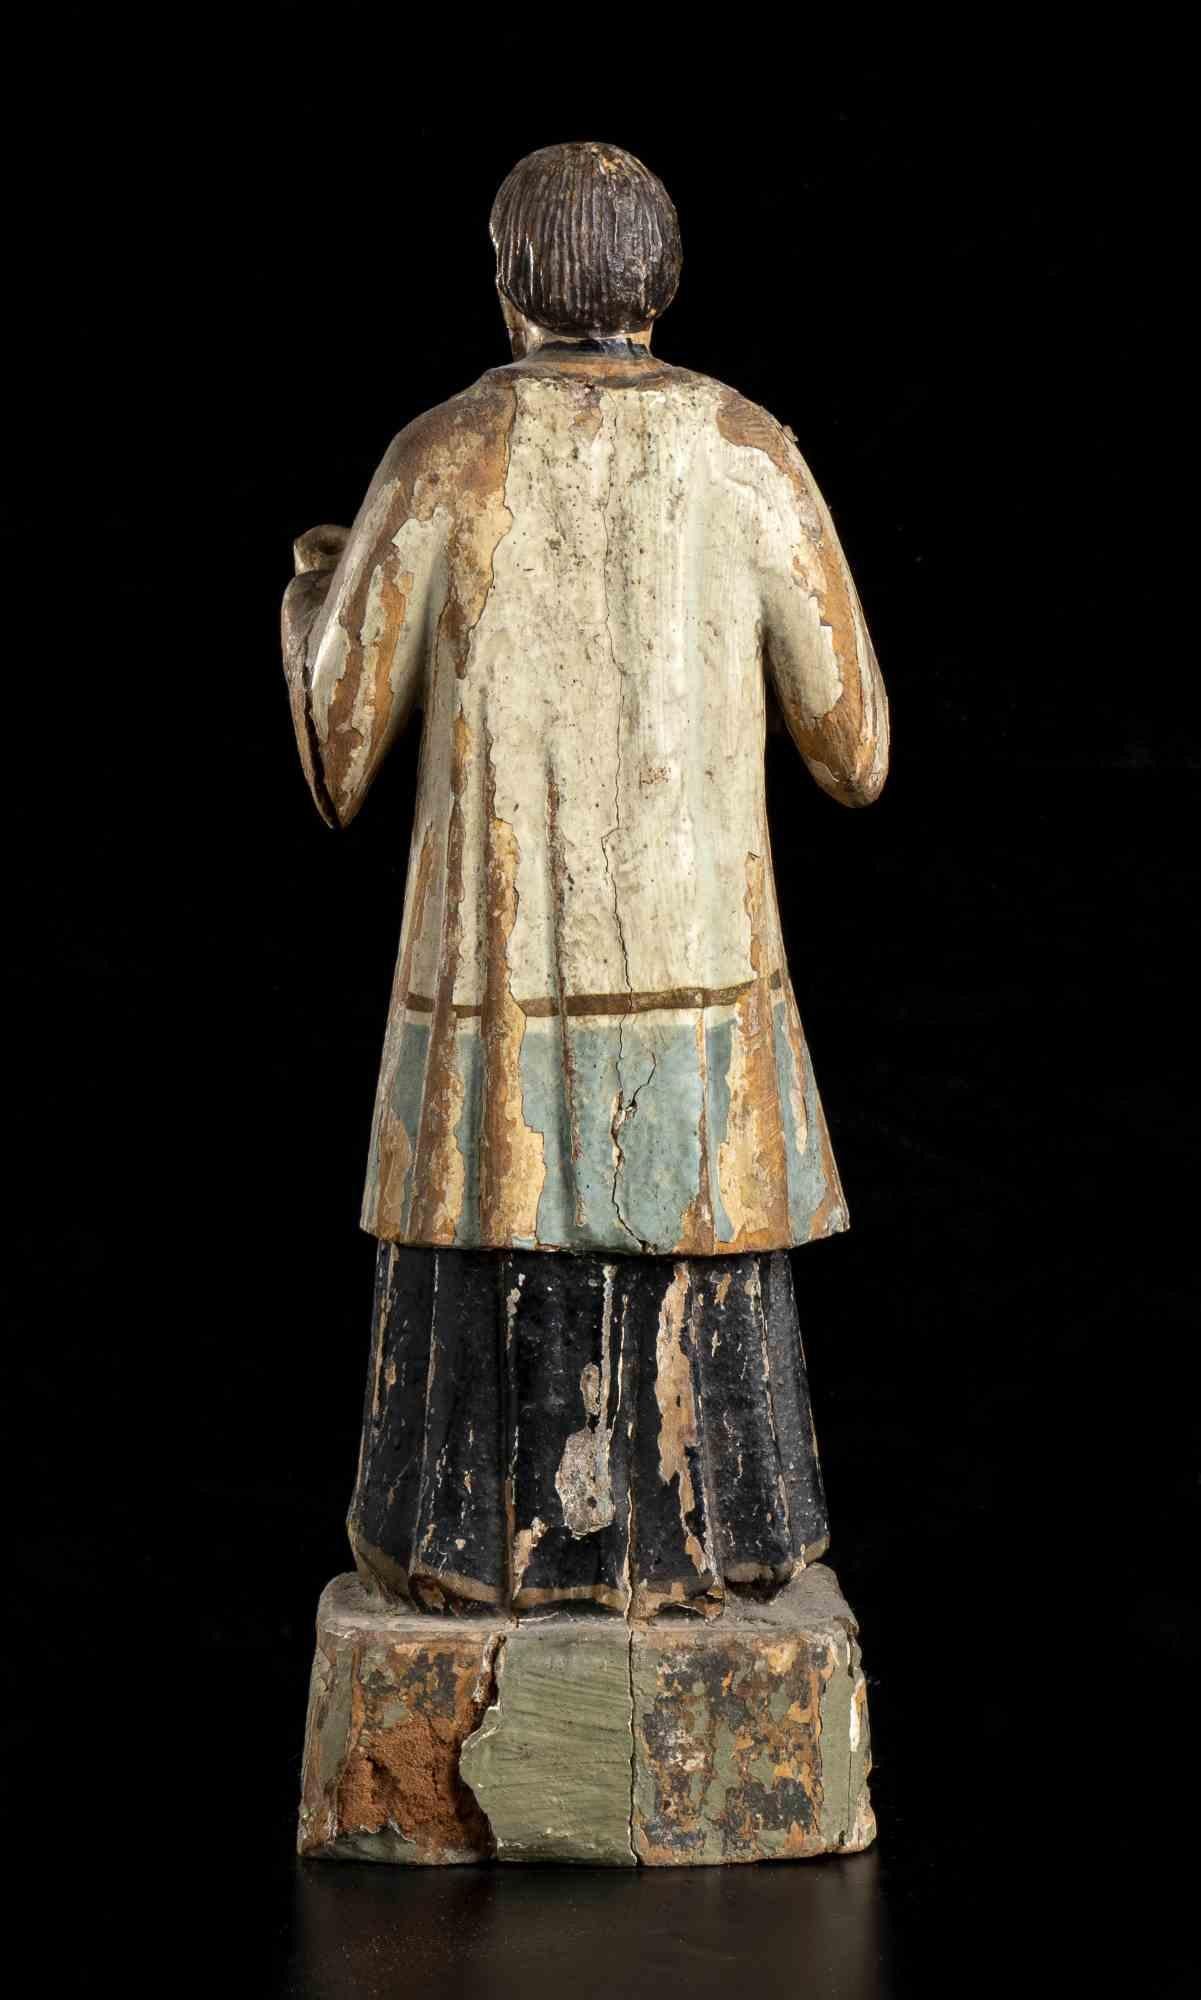 Indo-Portuguese, 18th-19th century

The figure standing on a square section base, both arms raised (one missing the forearm), wearing a full robe, the face with beard.

Provenance: Italian private collection.